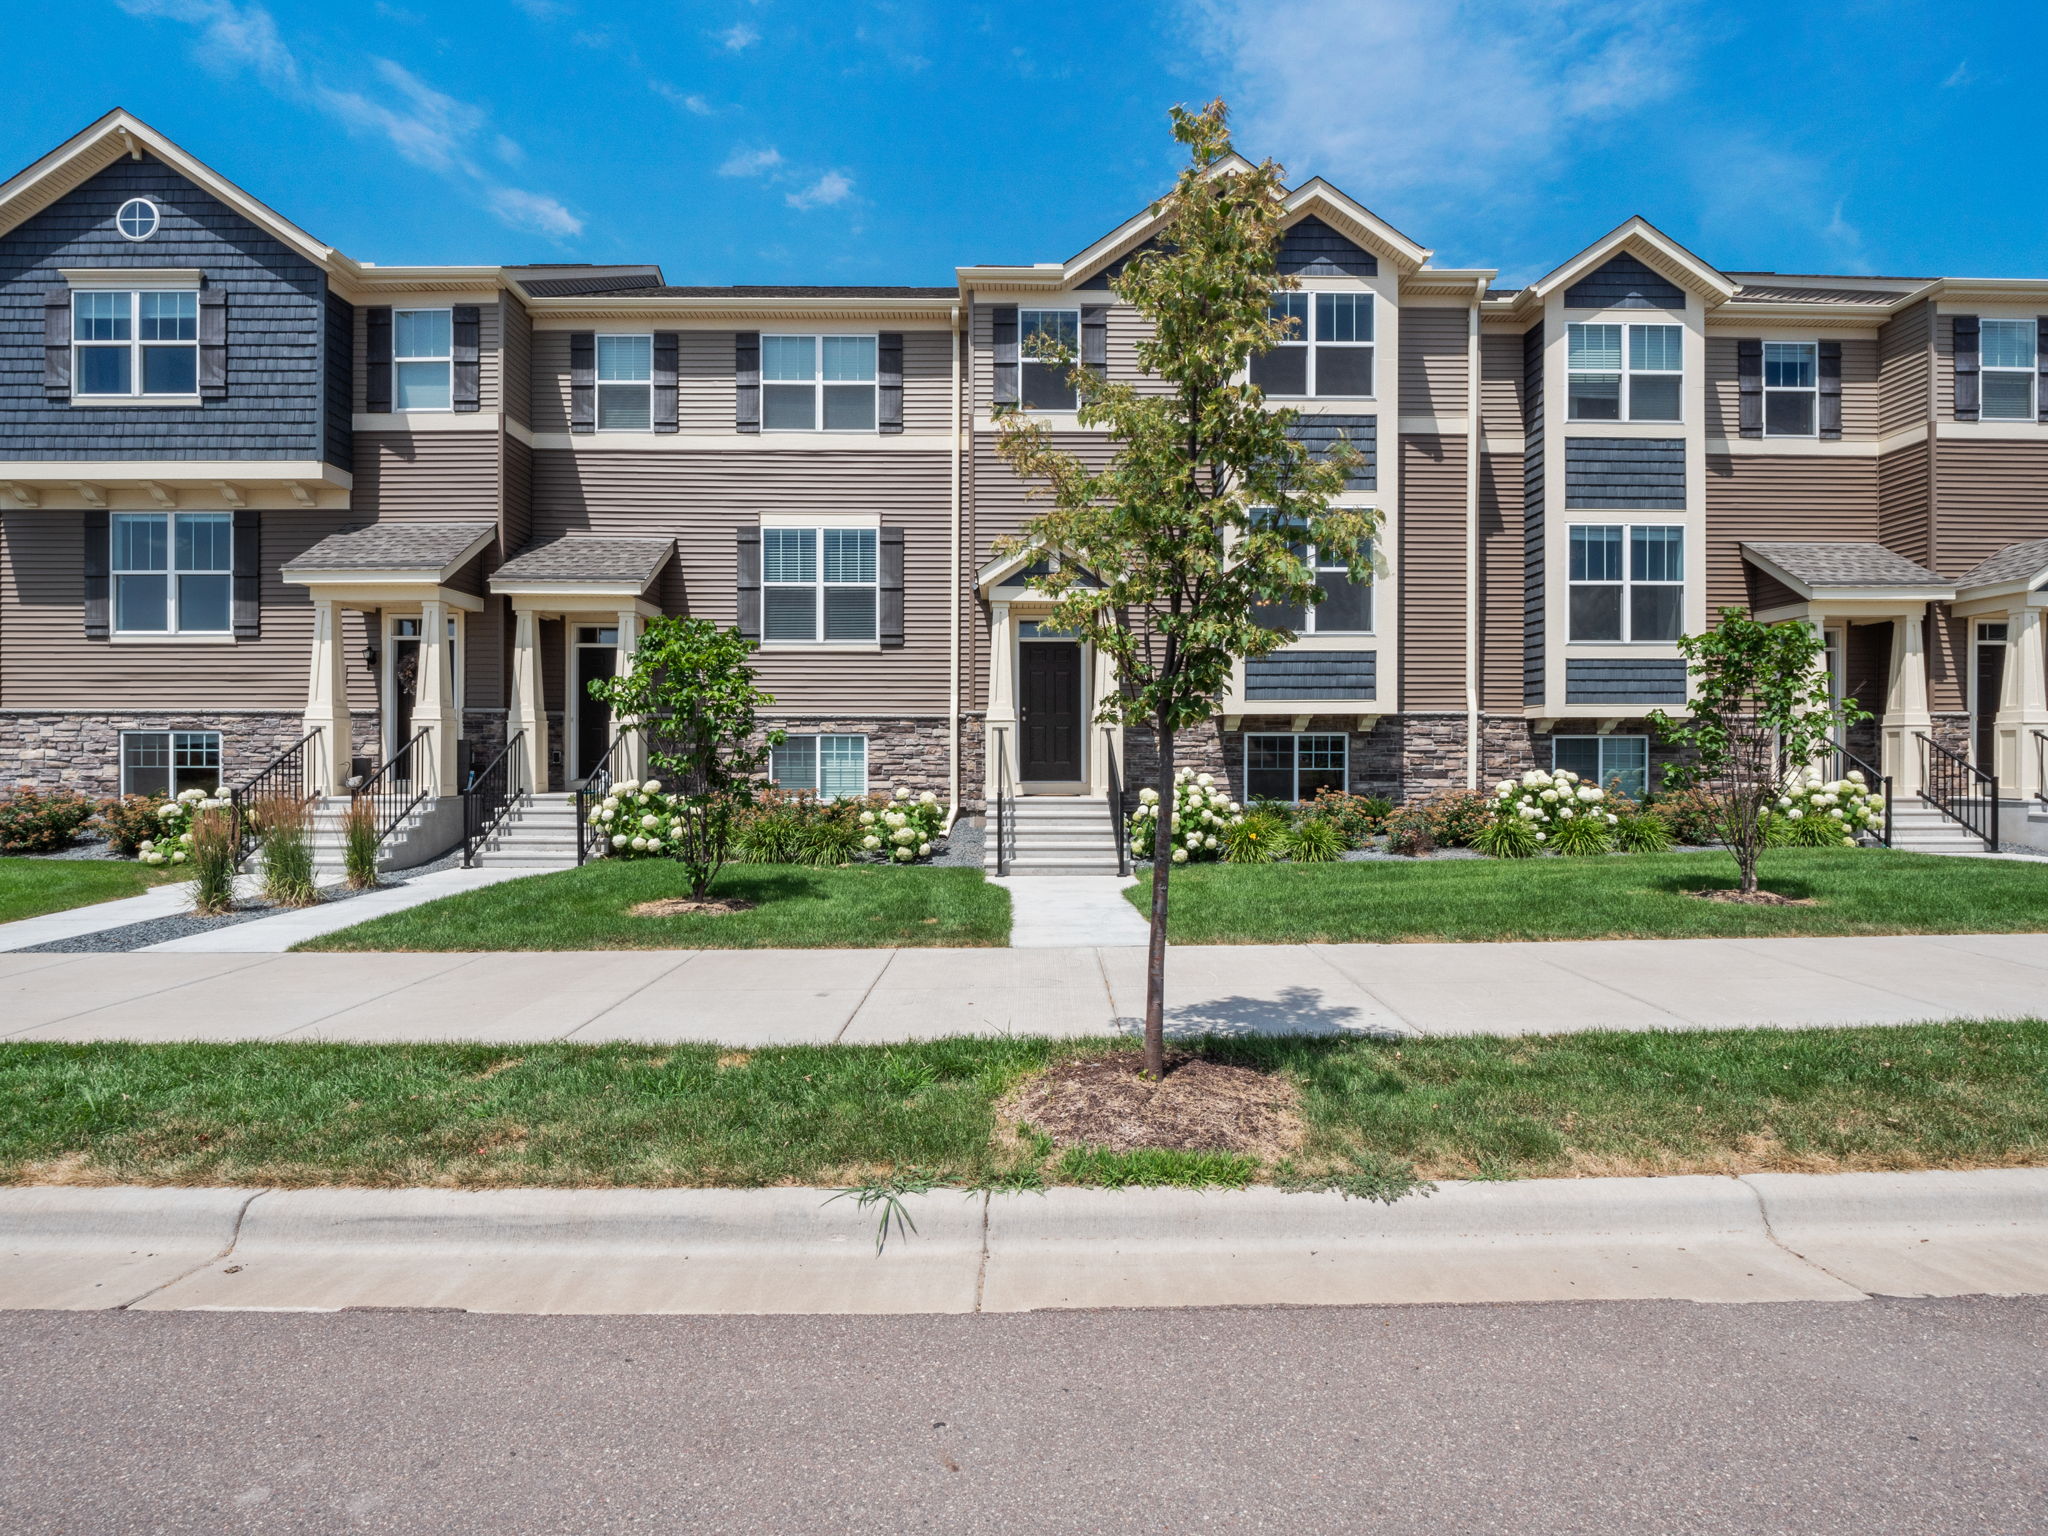  8113 Central Park Way, Maple Grove, MN 55369, US